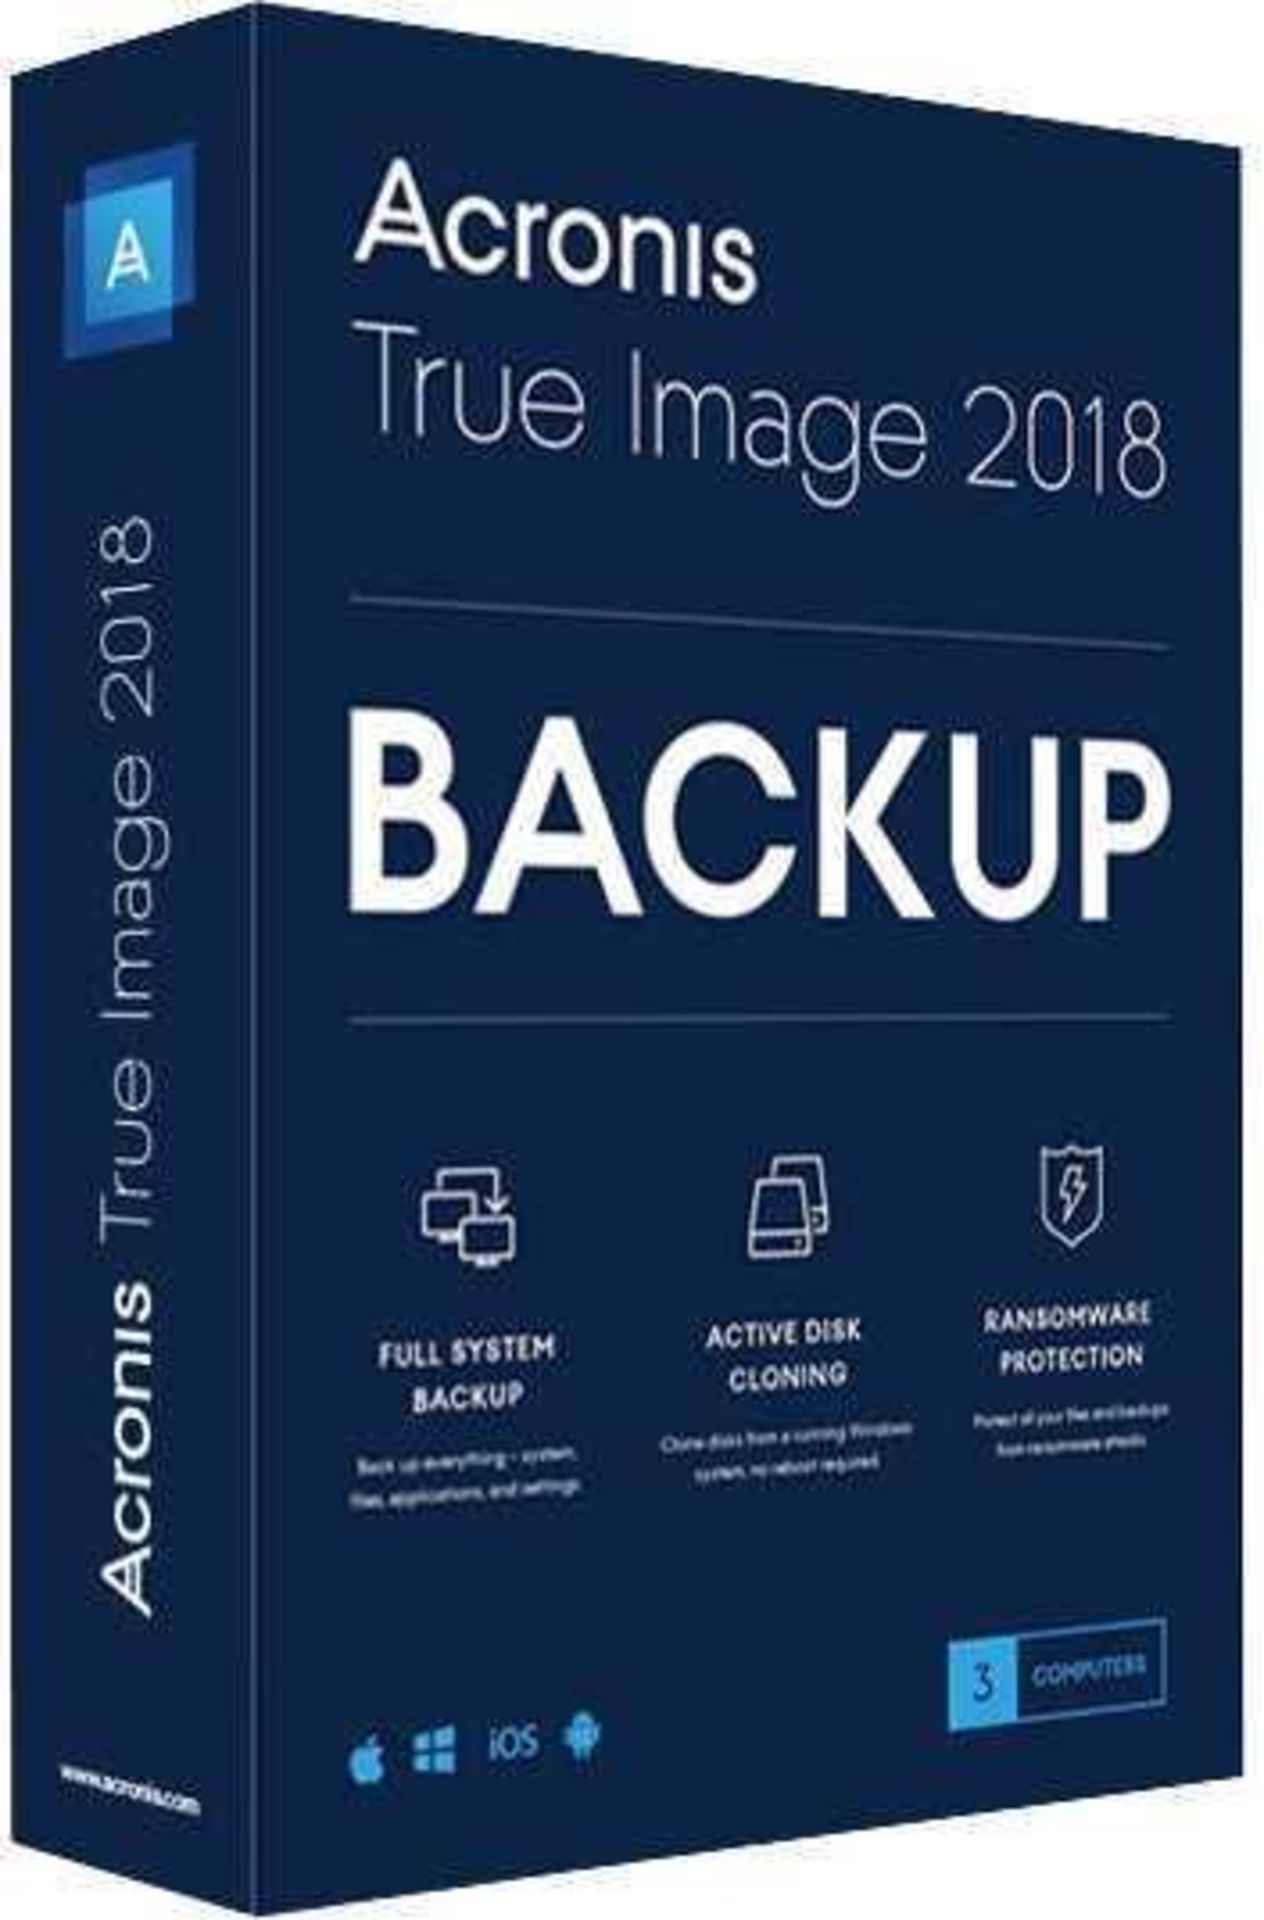 Rrp £40 Boxed Acronis True Image 2018 #1 Backup Software